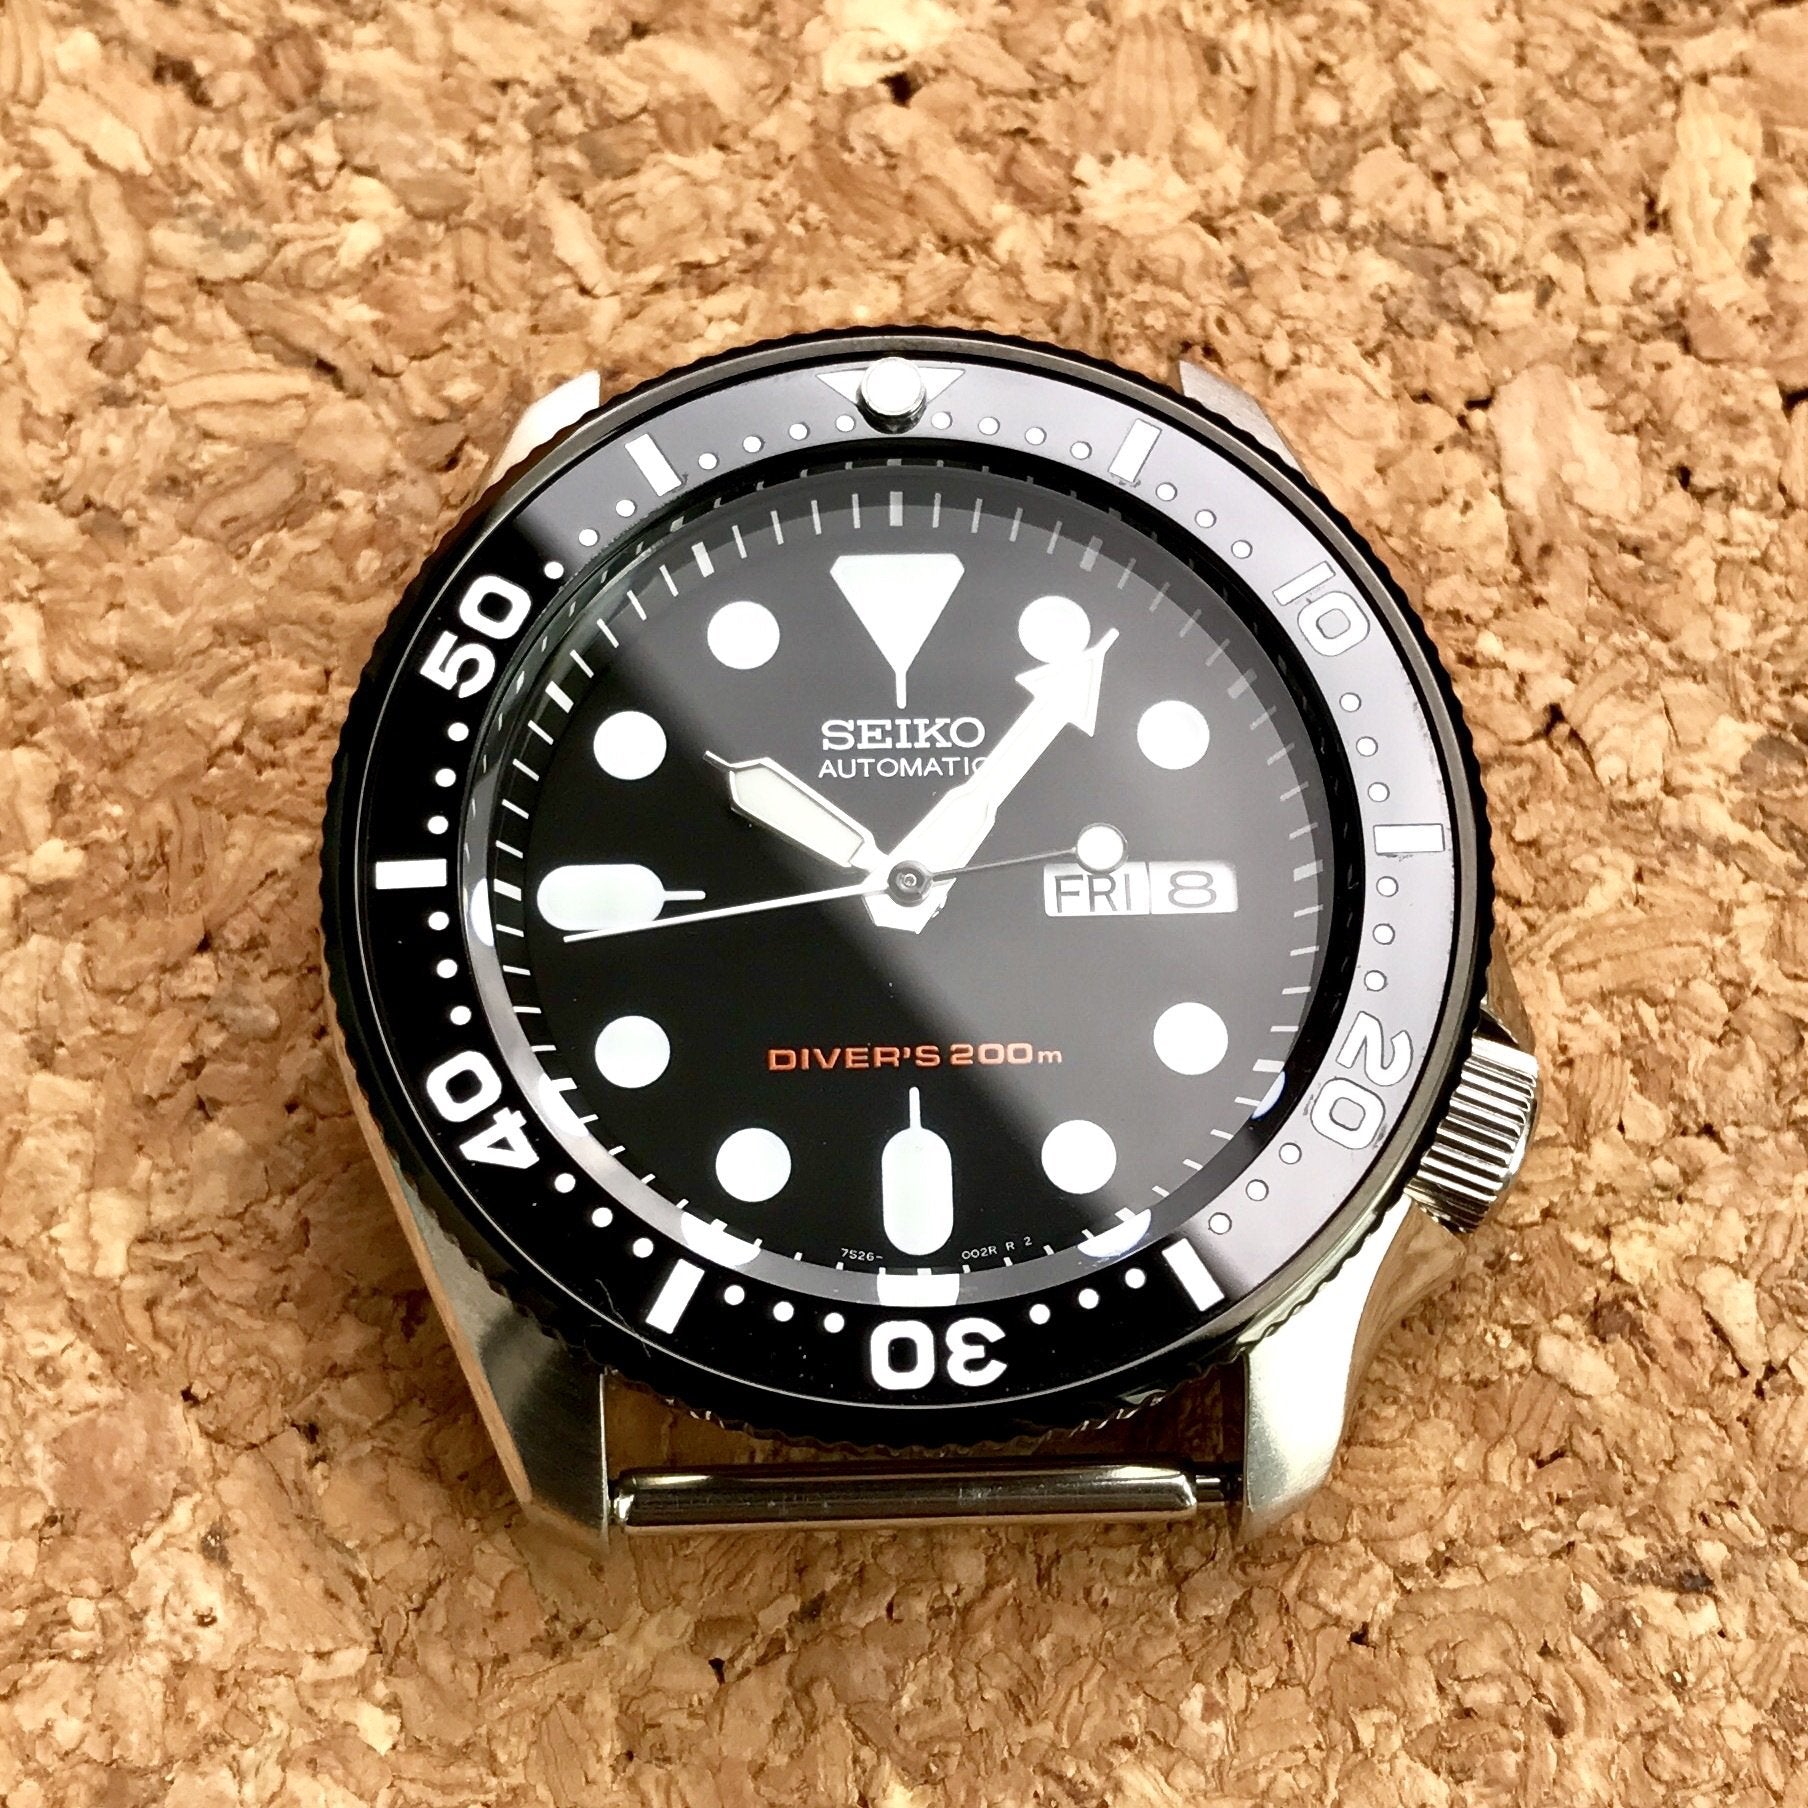 Bezel - SKX007/SRPD Coin Edge - Polished PVD Black - DLW WATCHES